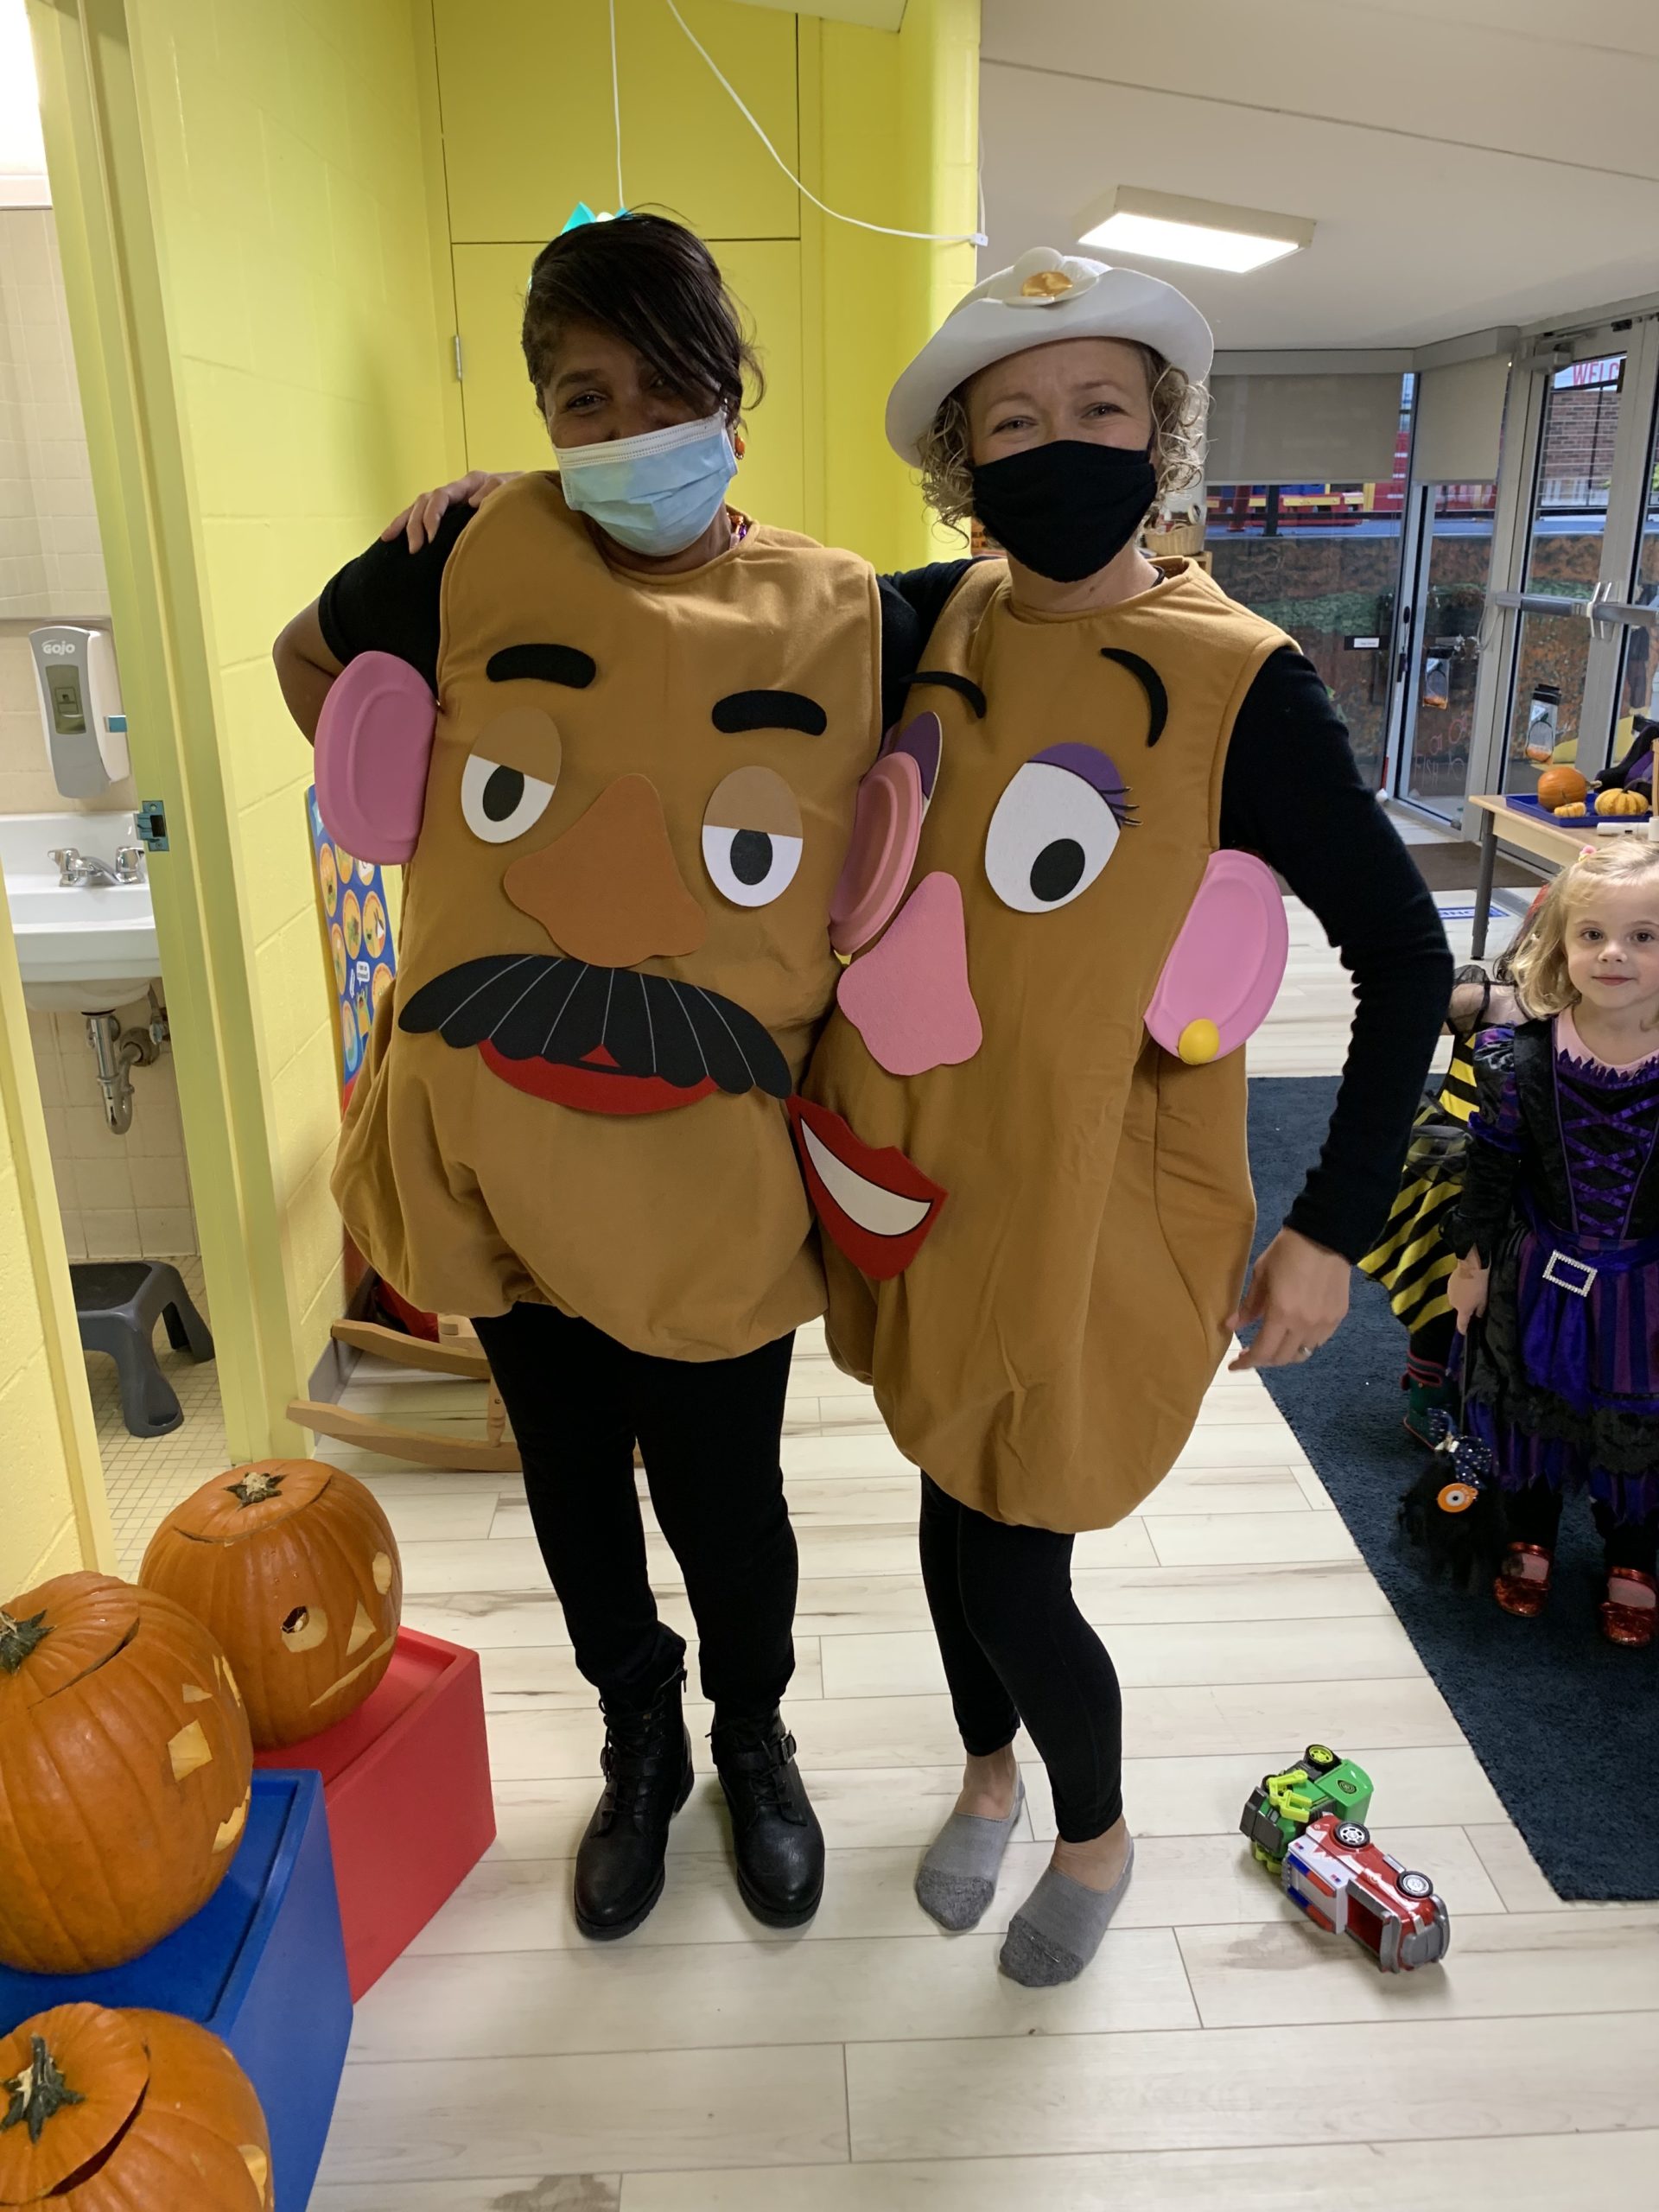 Miss Angela and Miss Jeanne dressed up as Mr. Potato Head for Halloween